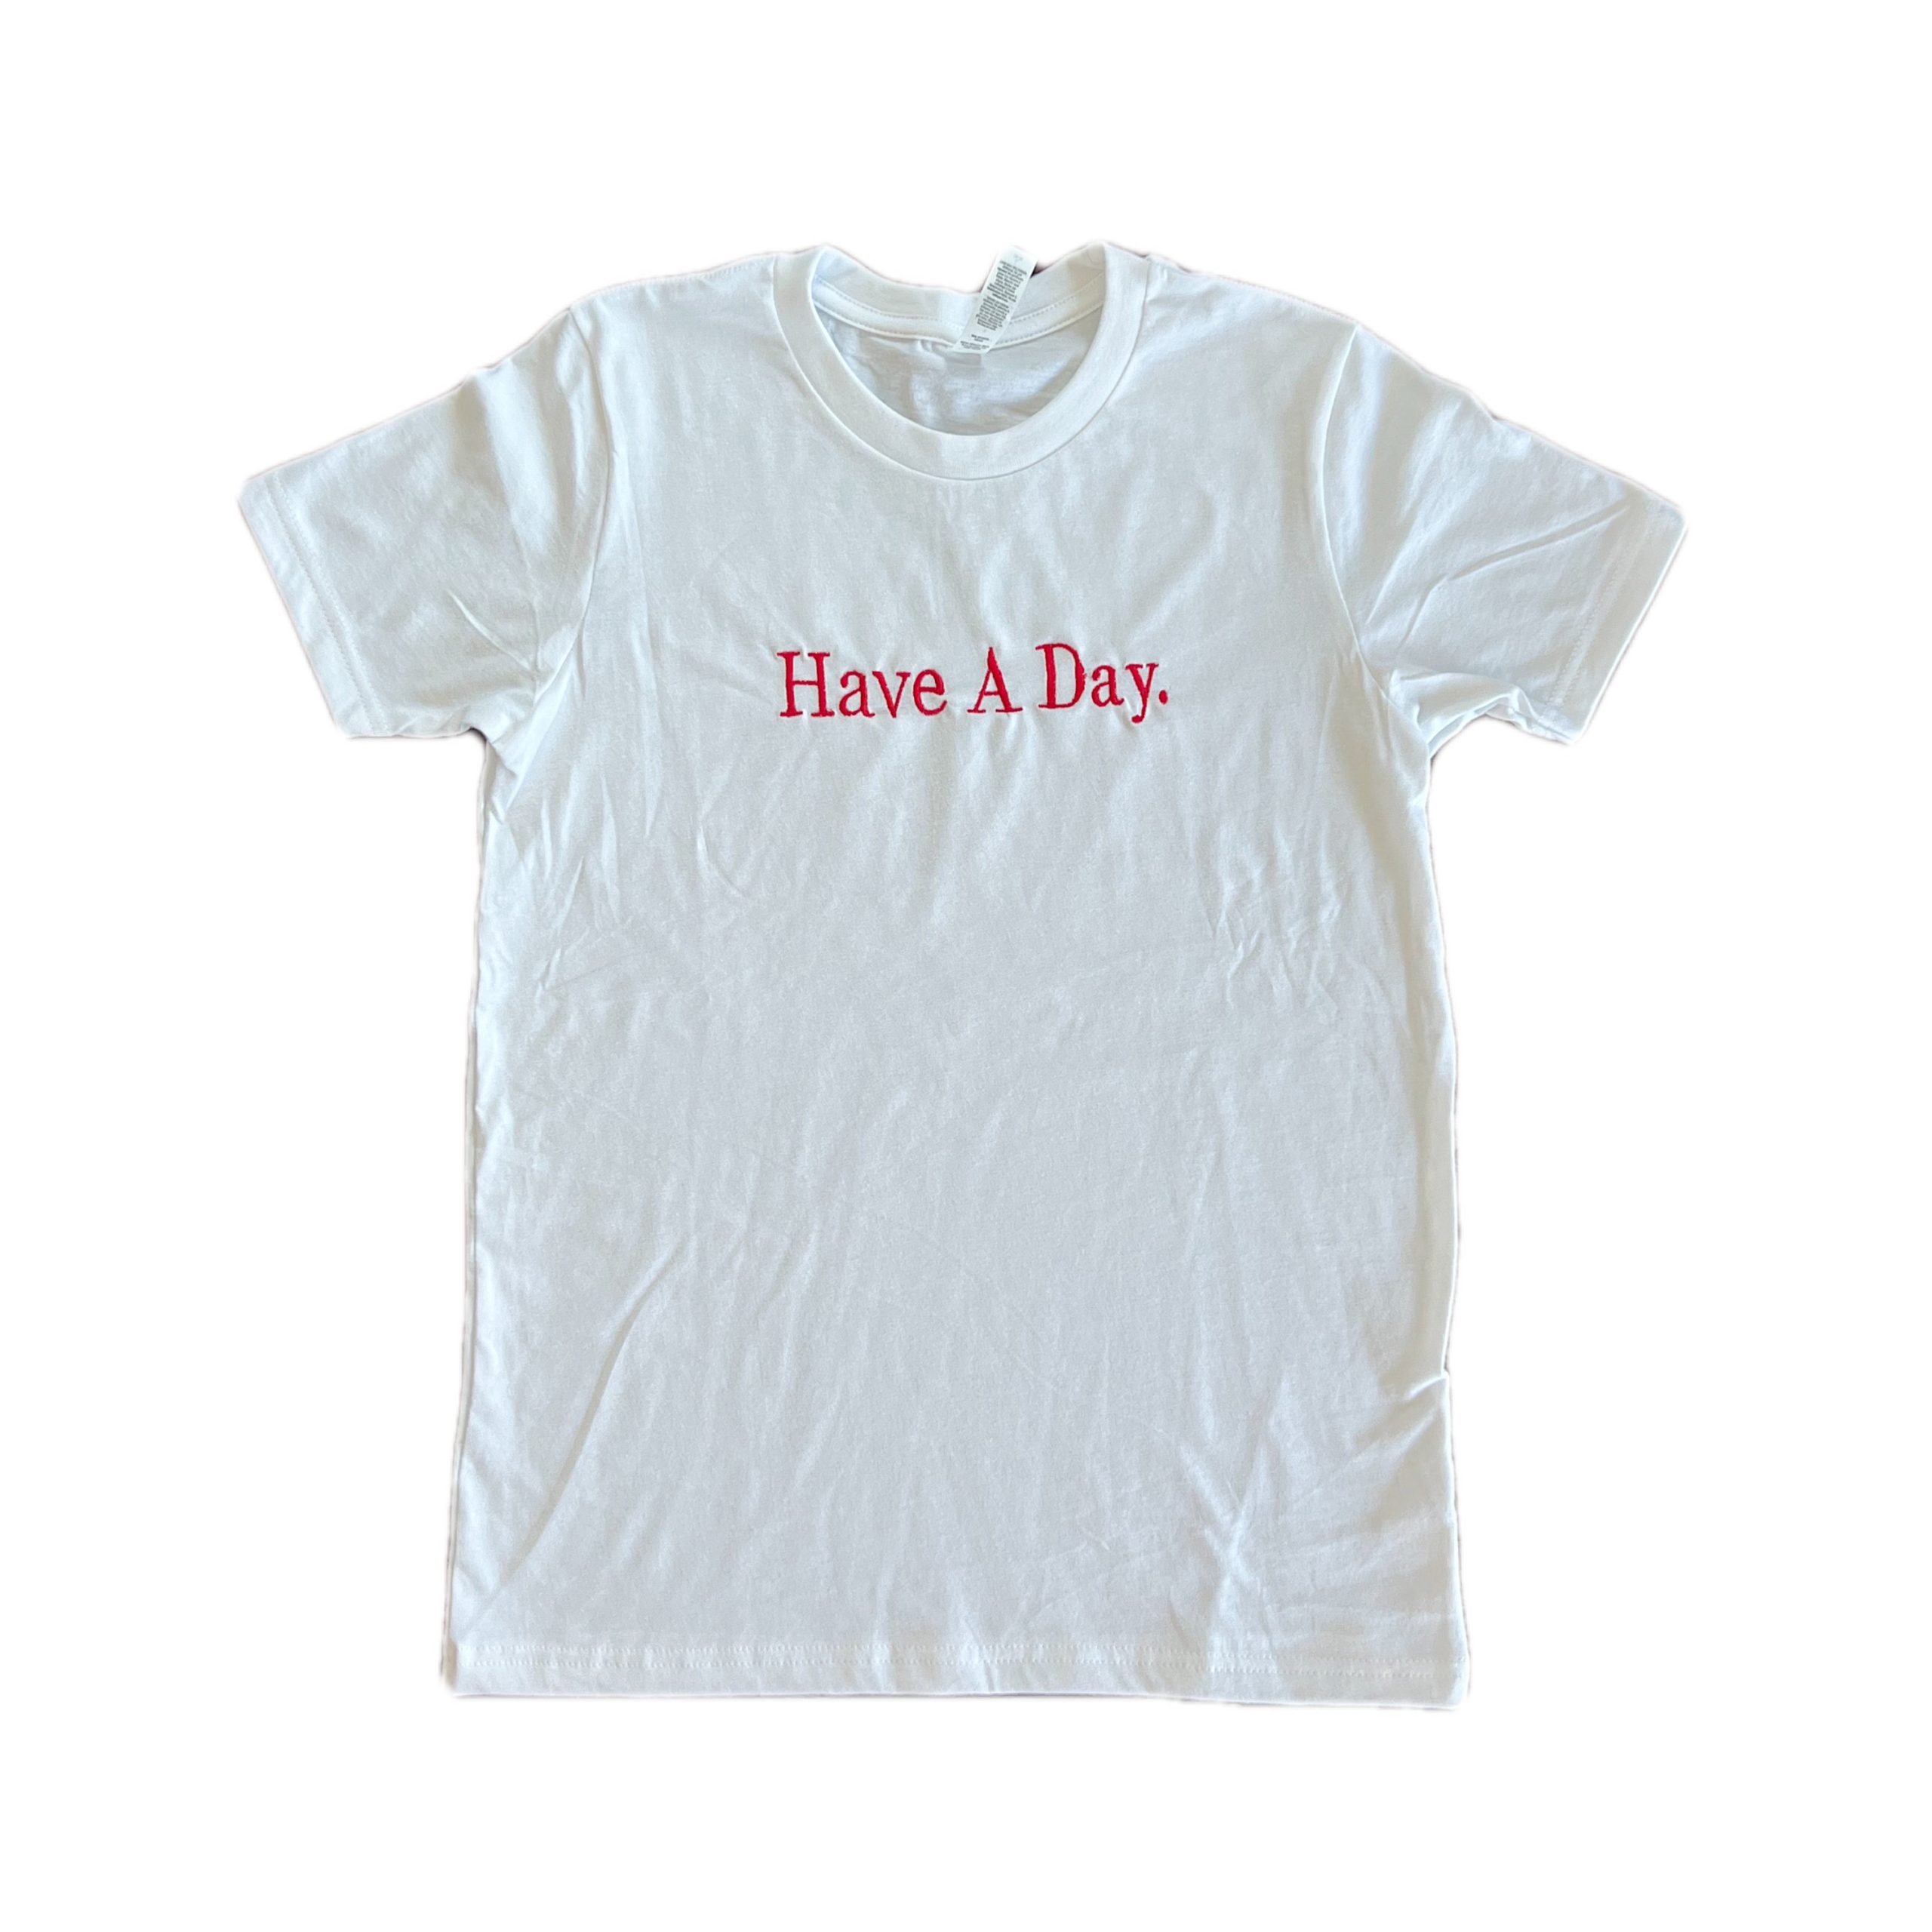 "Have a Day" Embroidered Y2K Aesthetic Trendy Baby Tee